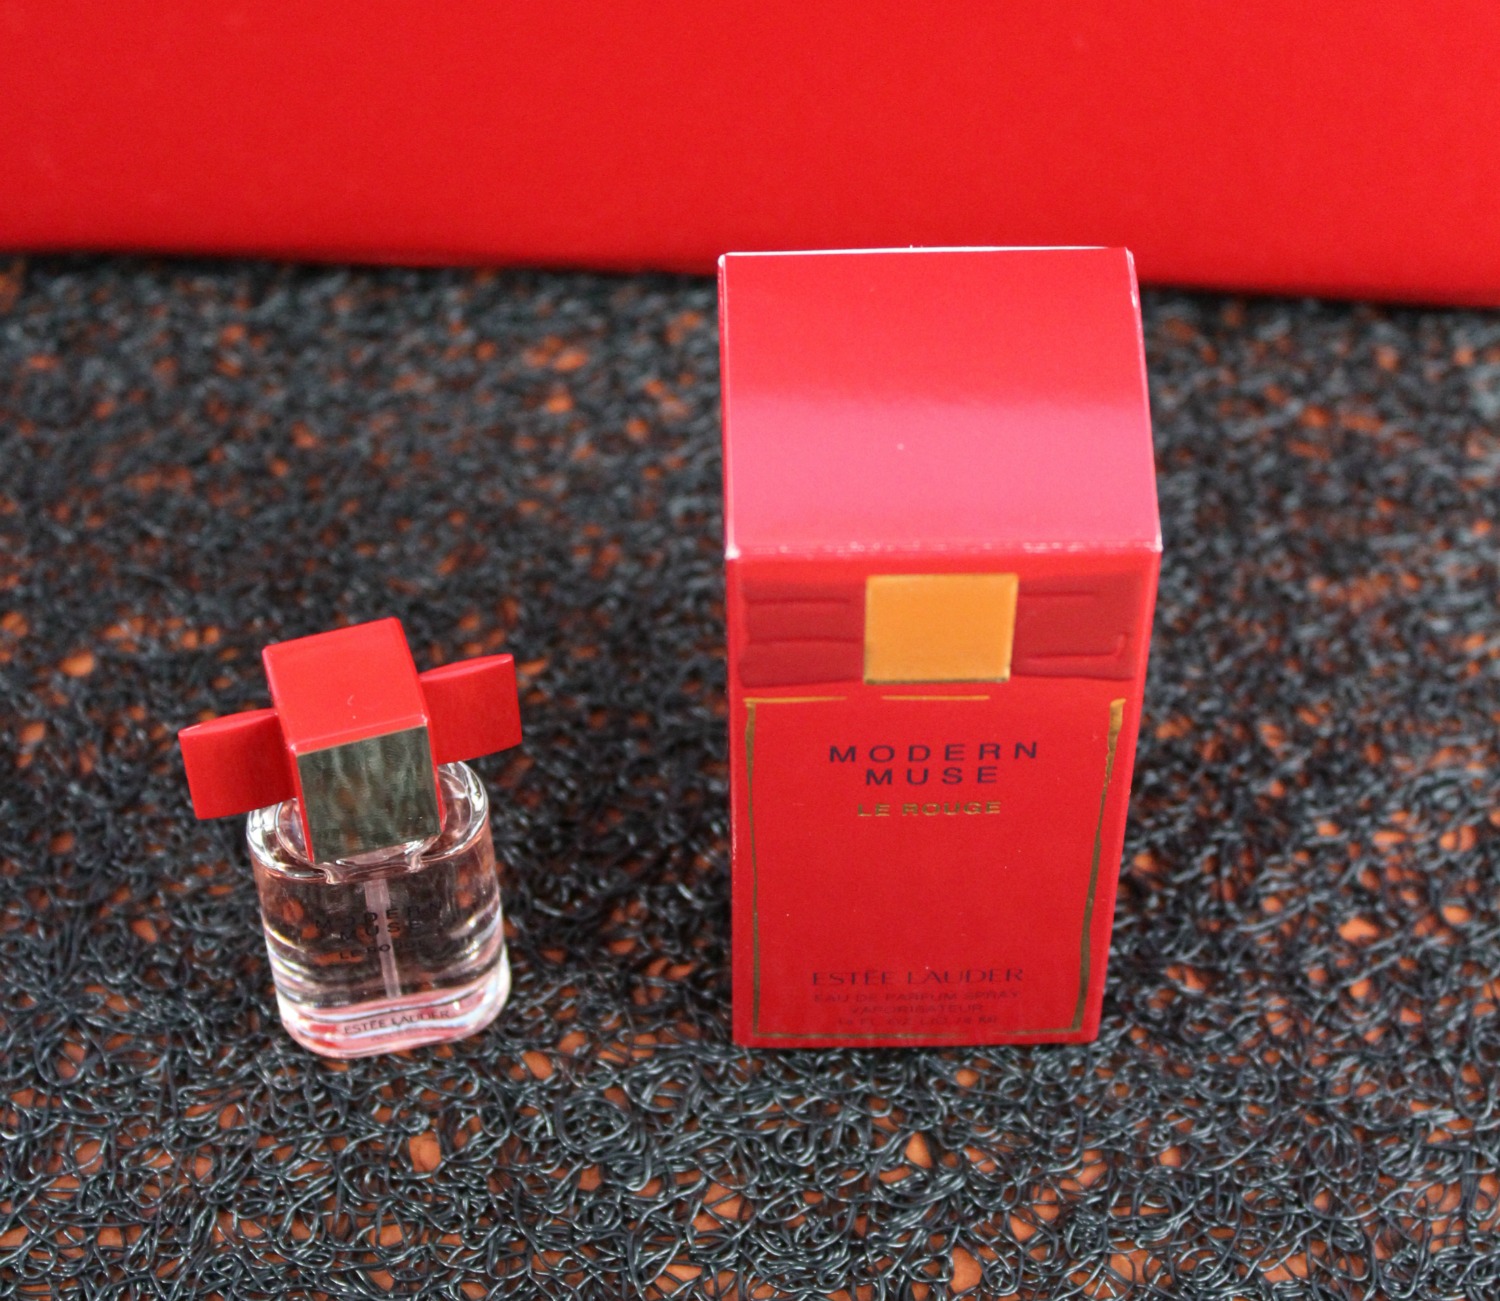 Estee Lauder Modern Muse Le Rouge - dare to inspire | Monica's beauty ...